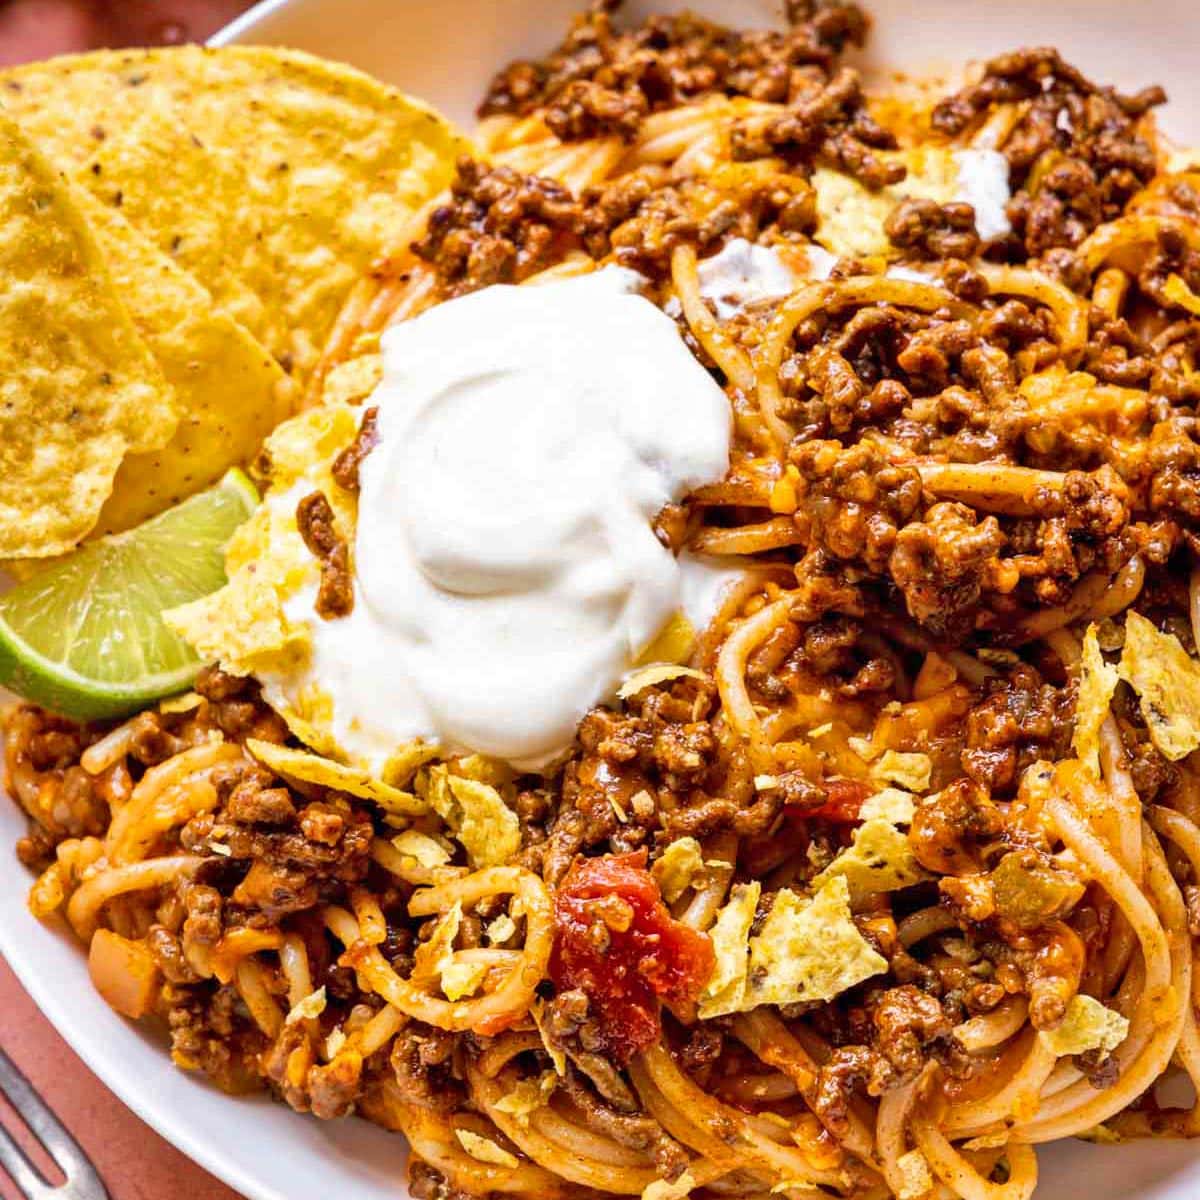 Taco Spaghetti finished pasta dish in bowl with chips, lime, and sour cream garnish